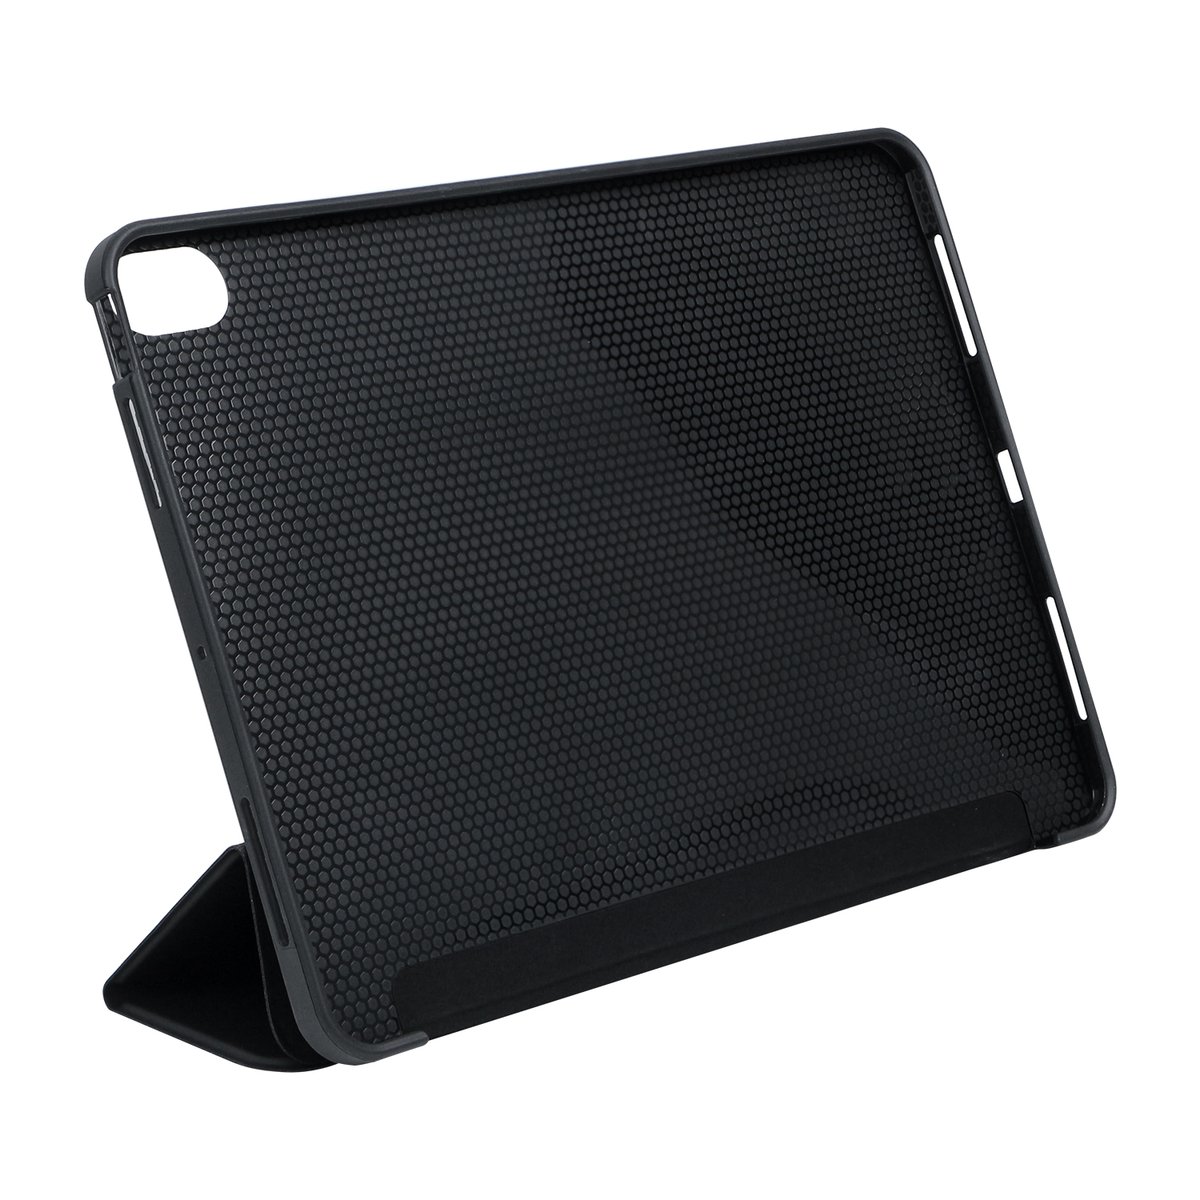 #share
🎉For simple design and useful protection, you should start with this protective case.
#Ebits #officeuse #iPad #custom #OEM #ODM #case #protection #protectivecase